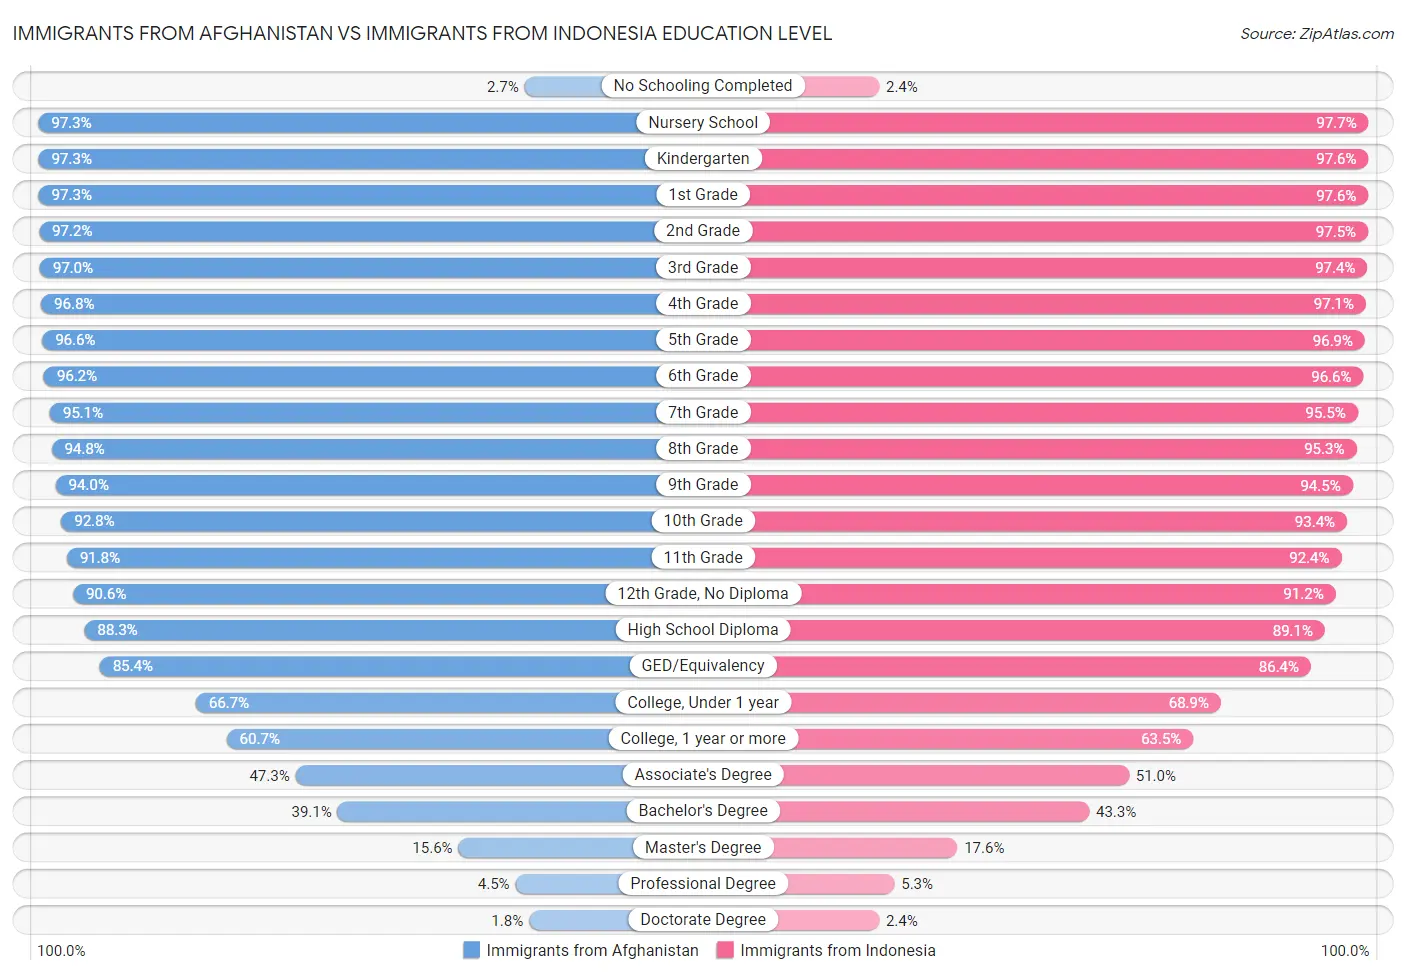 Immigrants from Afghanistan vs Immigrants from Indonesia Education Level